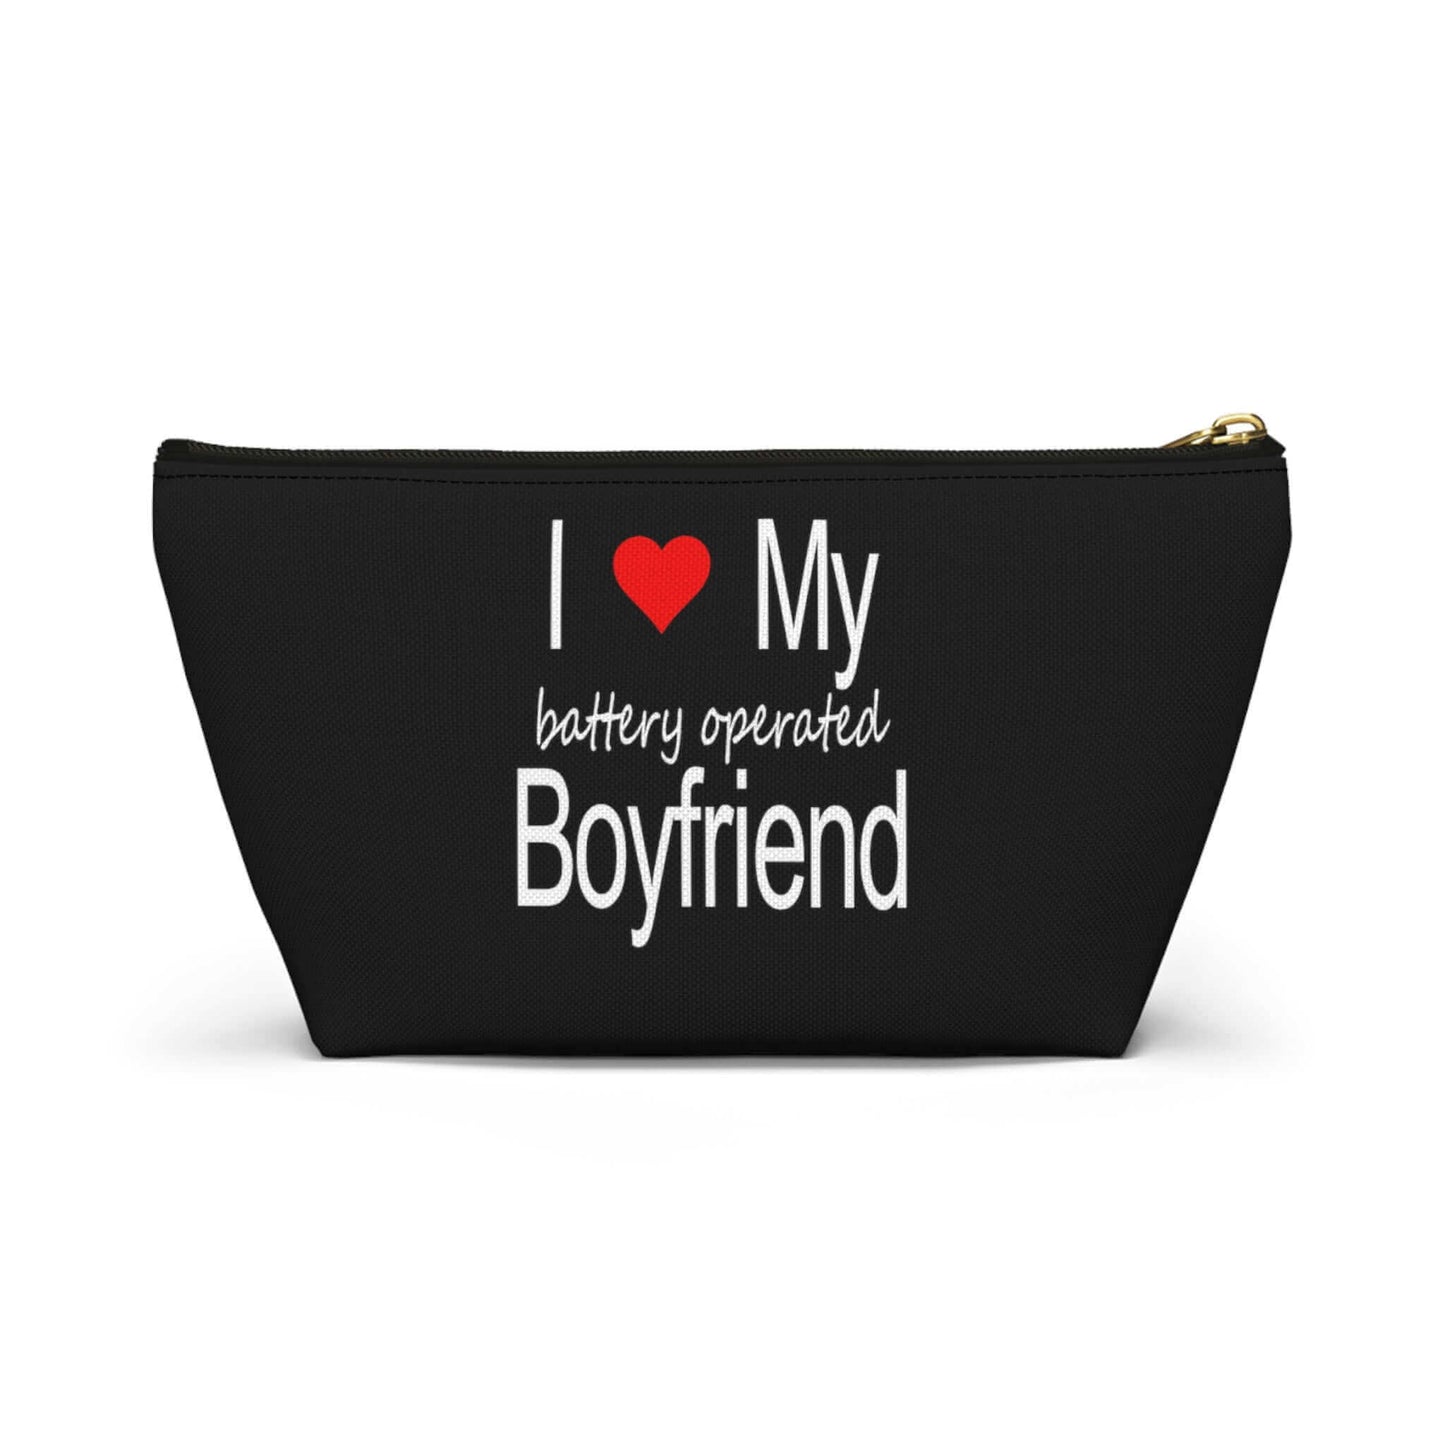 Sex toy pouch. Zipper bag for vibrator or dildo. Adult toy storage. I love my battery operated boyfriend,